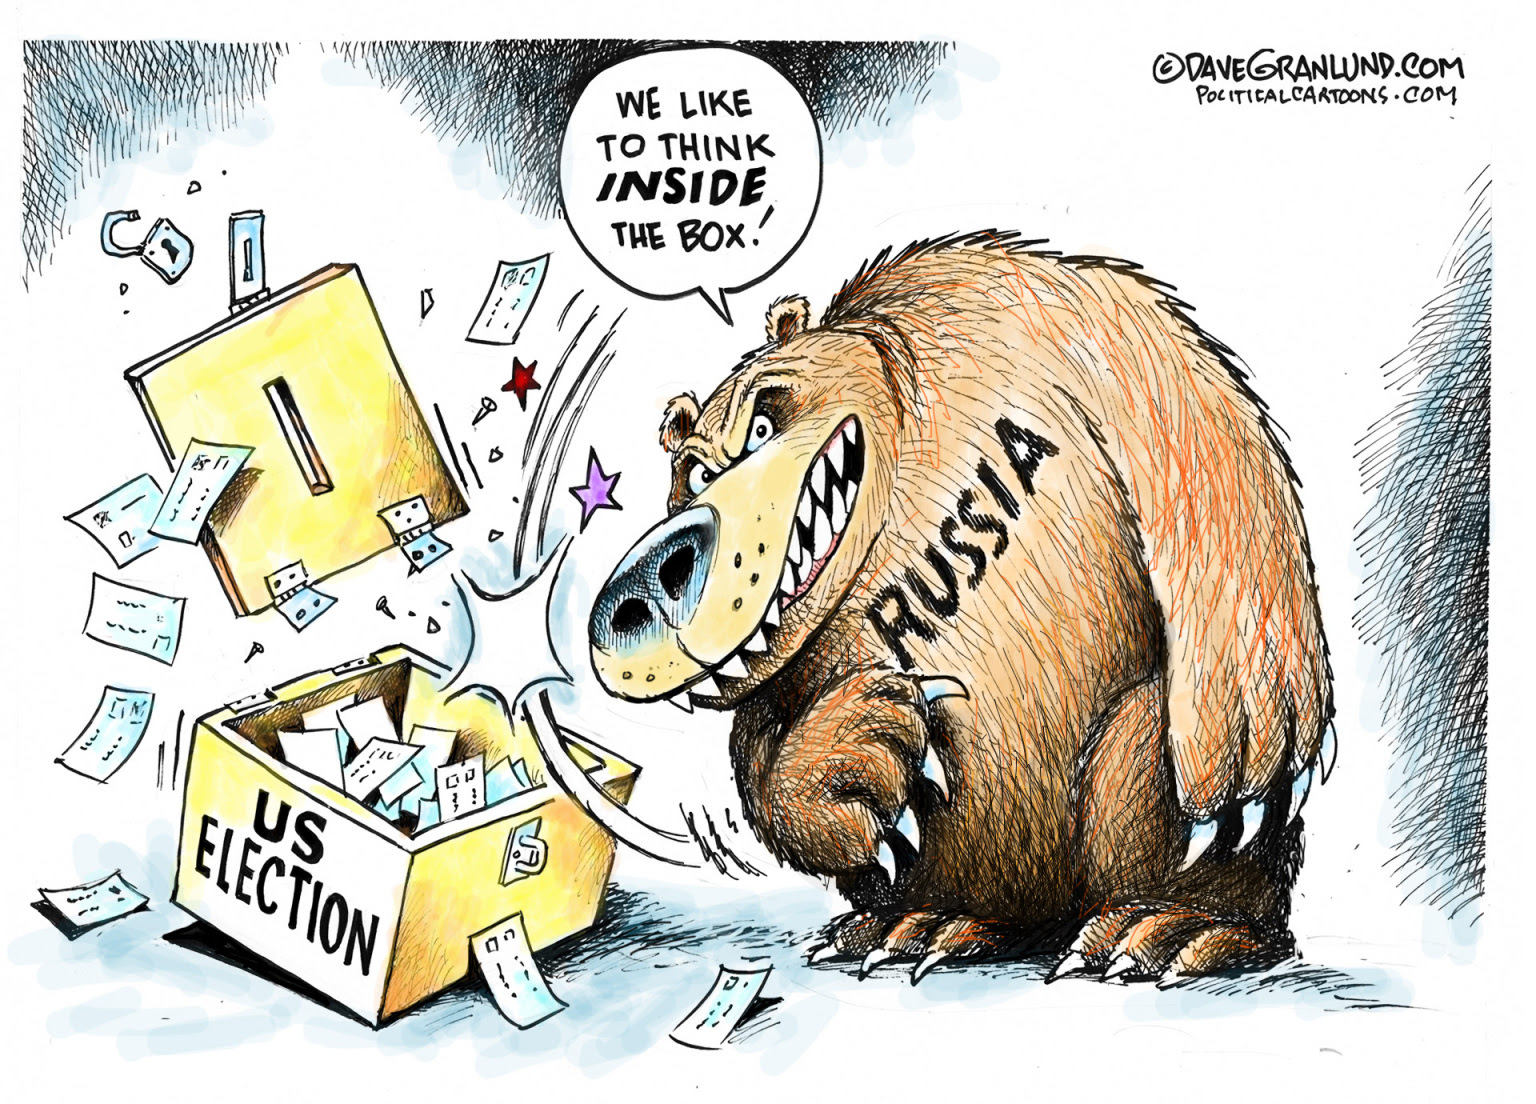 Russians attack US Elections